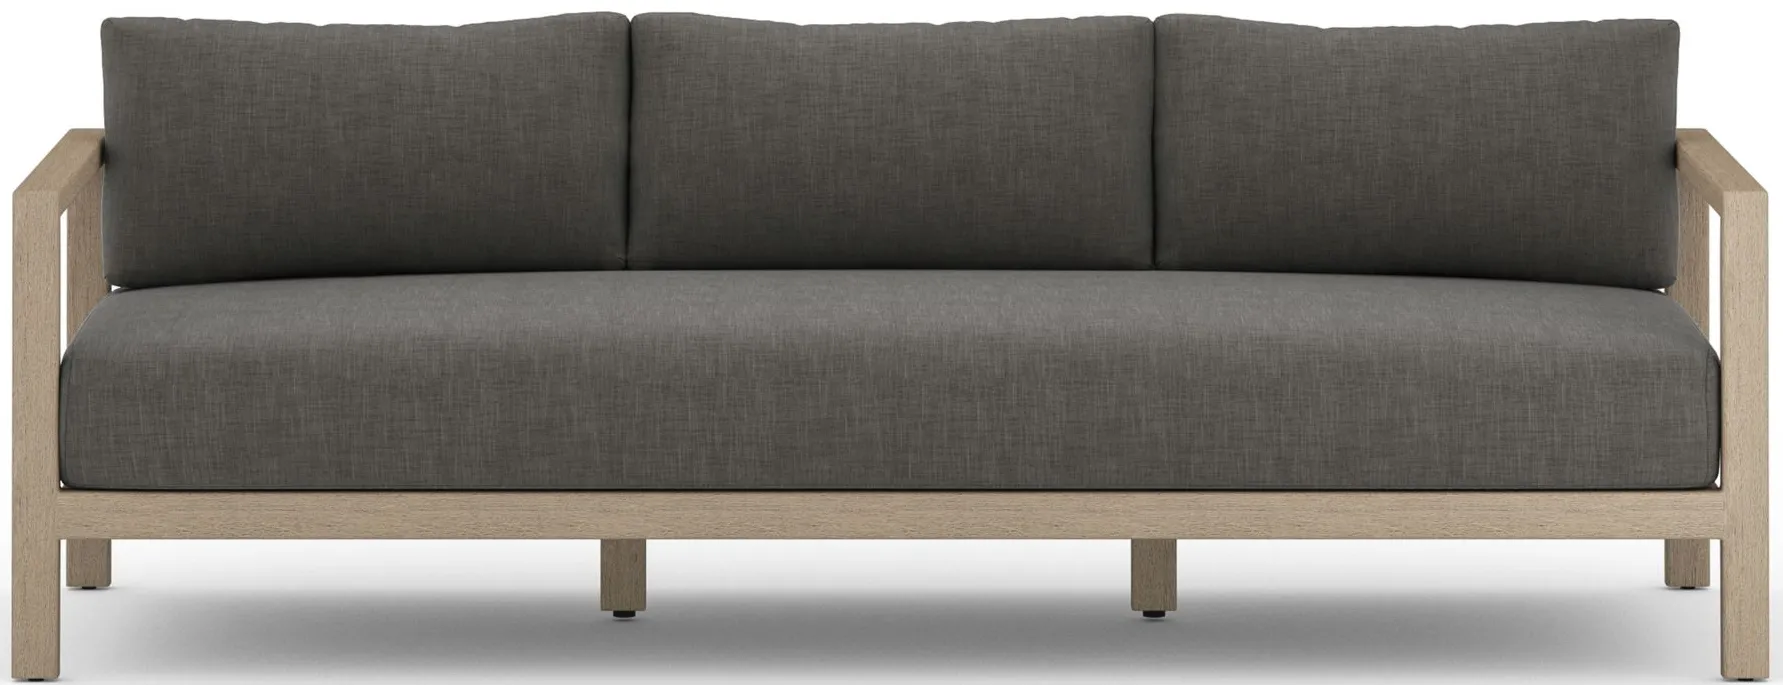 Auberon Outdoor Sofa in Charcoal by Four Hands